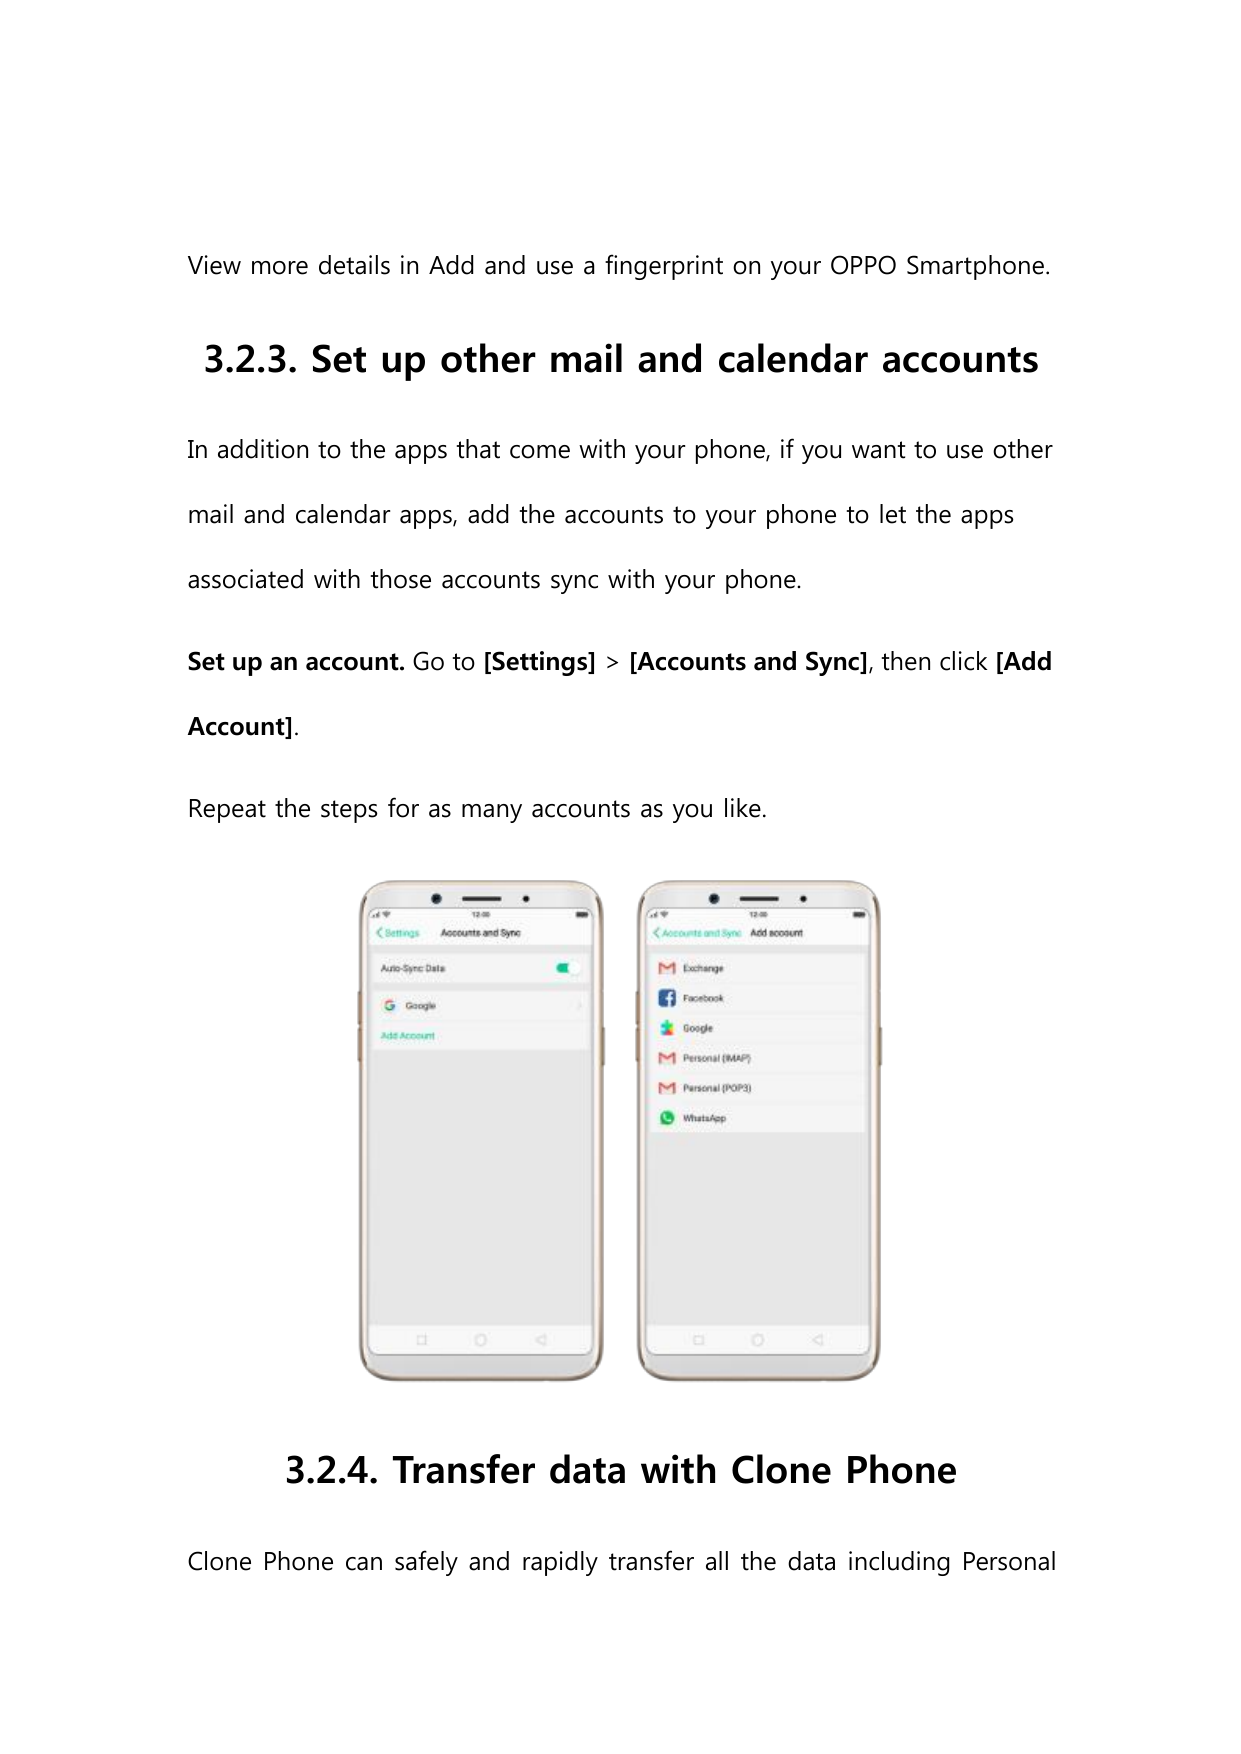 View more details in Add and use a fingerprint on your OPPO Smartphone.3.2.3. Set up other mail and calendar accountsIn addition